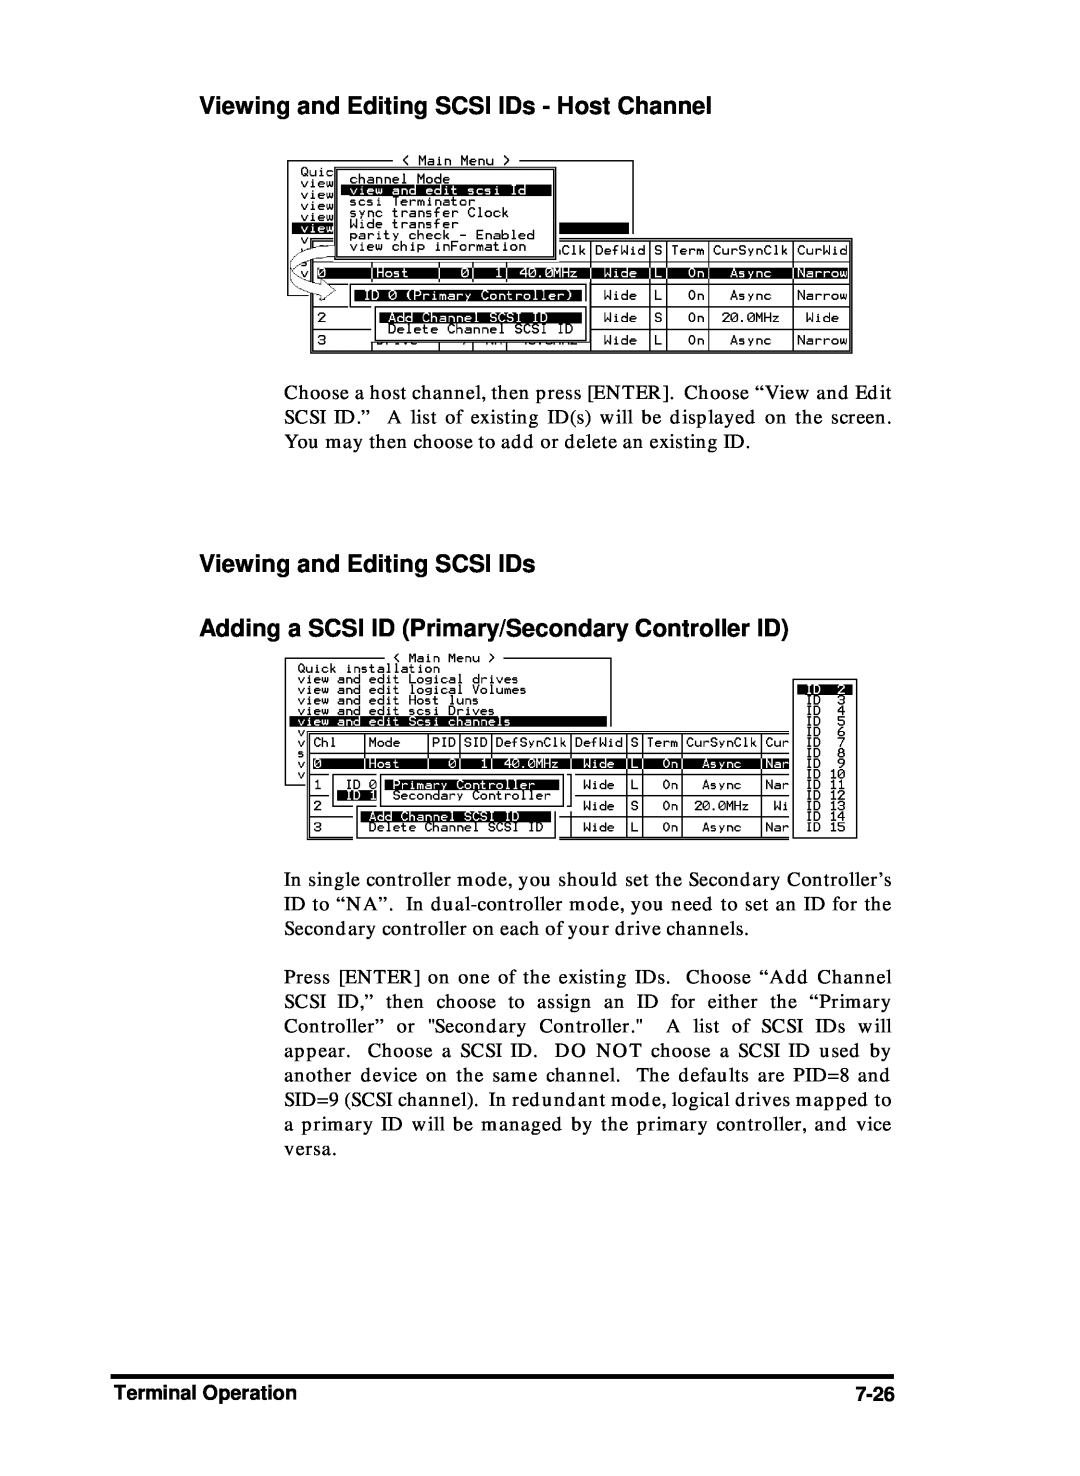 Compaq Infortrend manual Viewing and Editing SCSI IDs - Host Channel, Adding a SCSI ID Primary/Secondary Controller ID 